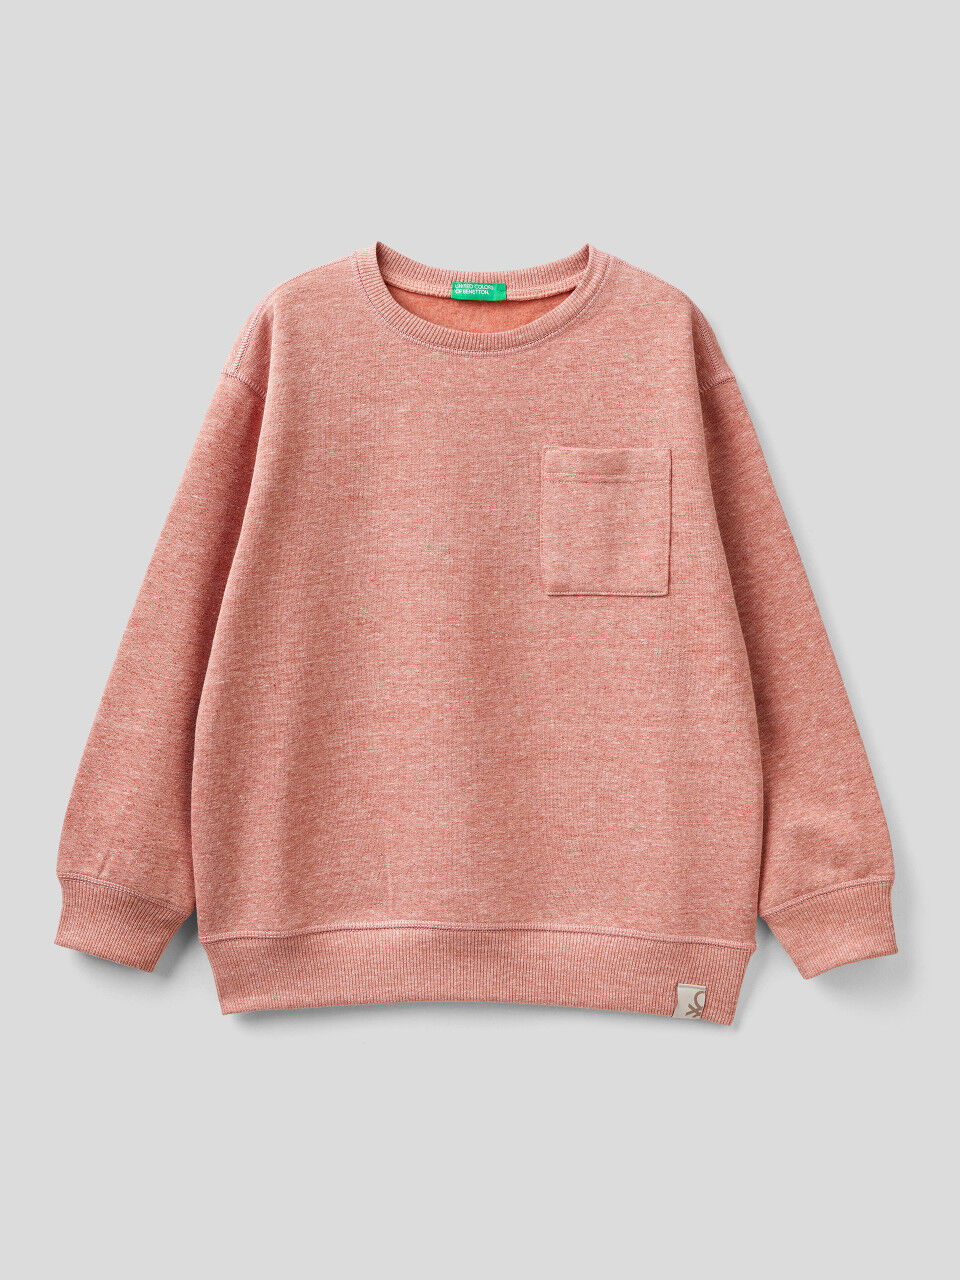 Pullover sweatshirt in recycled fabric